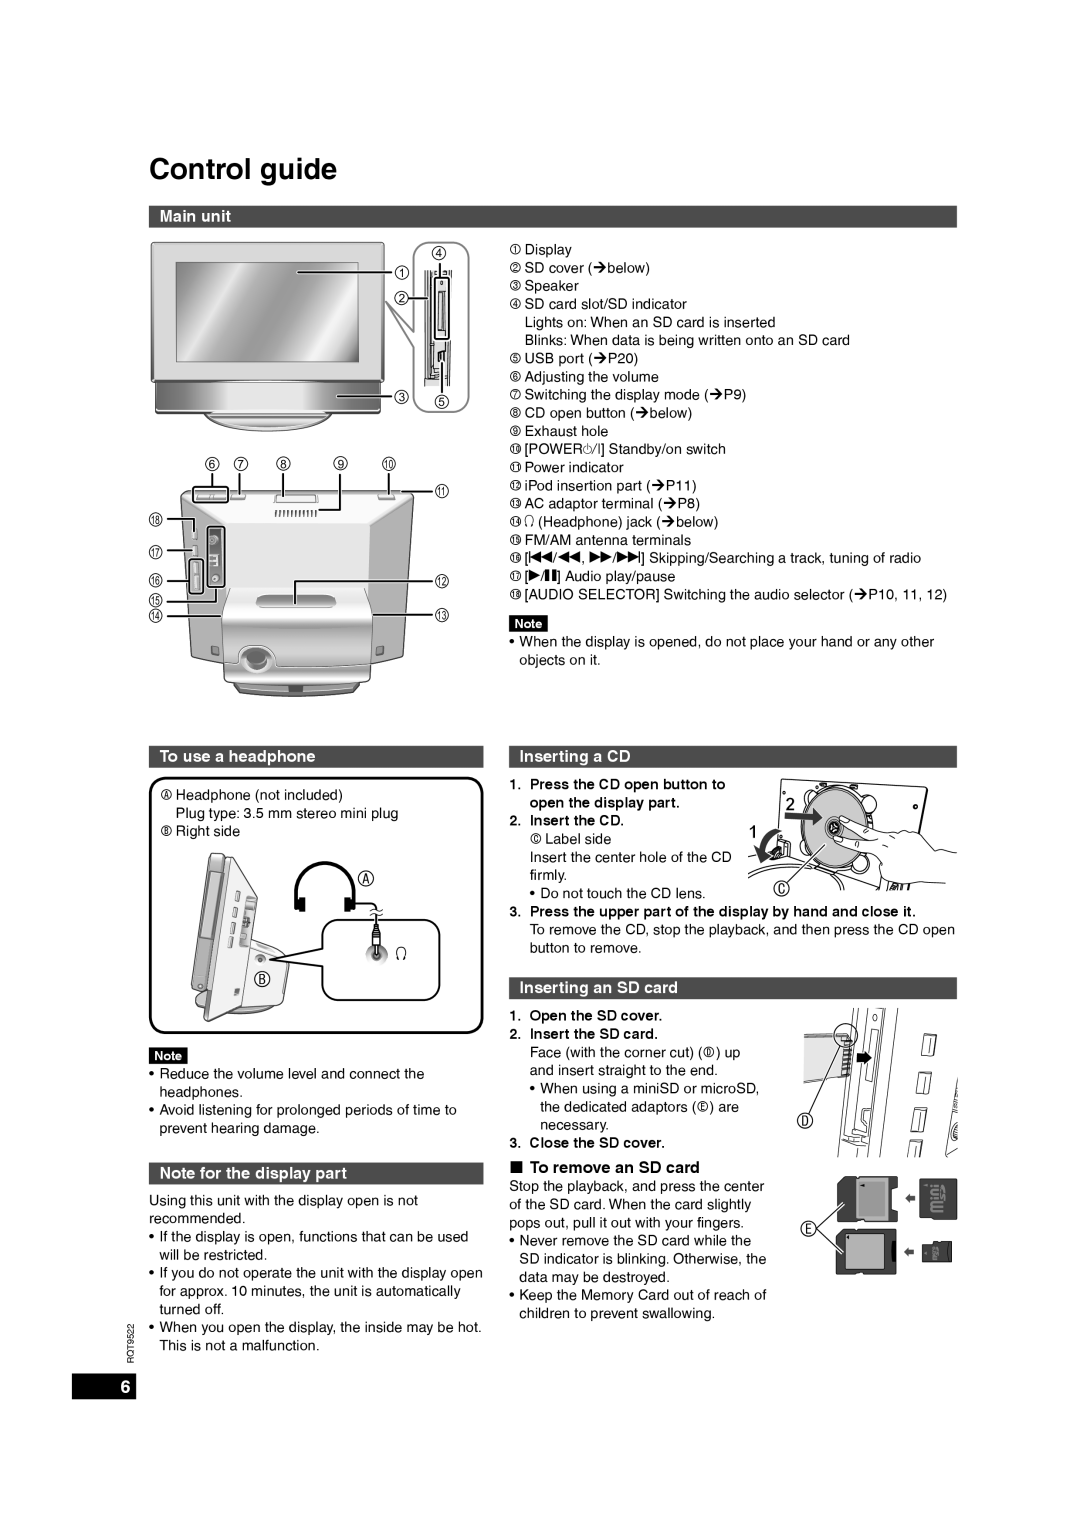 Panasonic MW-10 Control guide, Main unit, To use a headphone, Note for the display part, Inserting a CD 